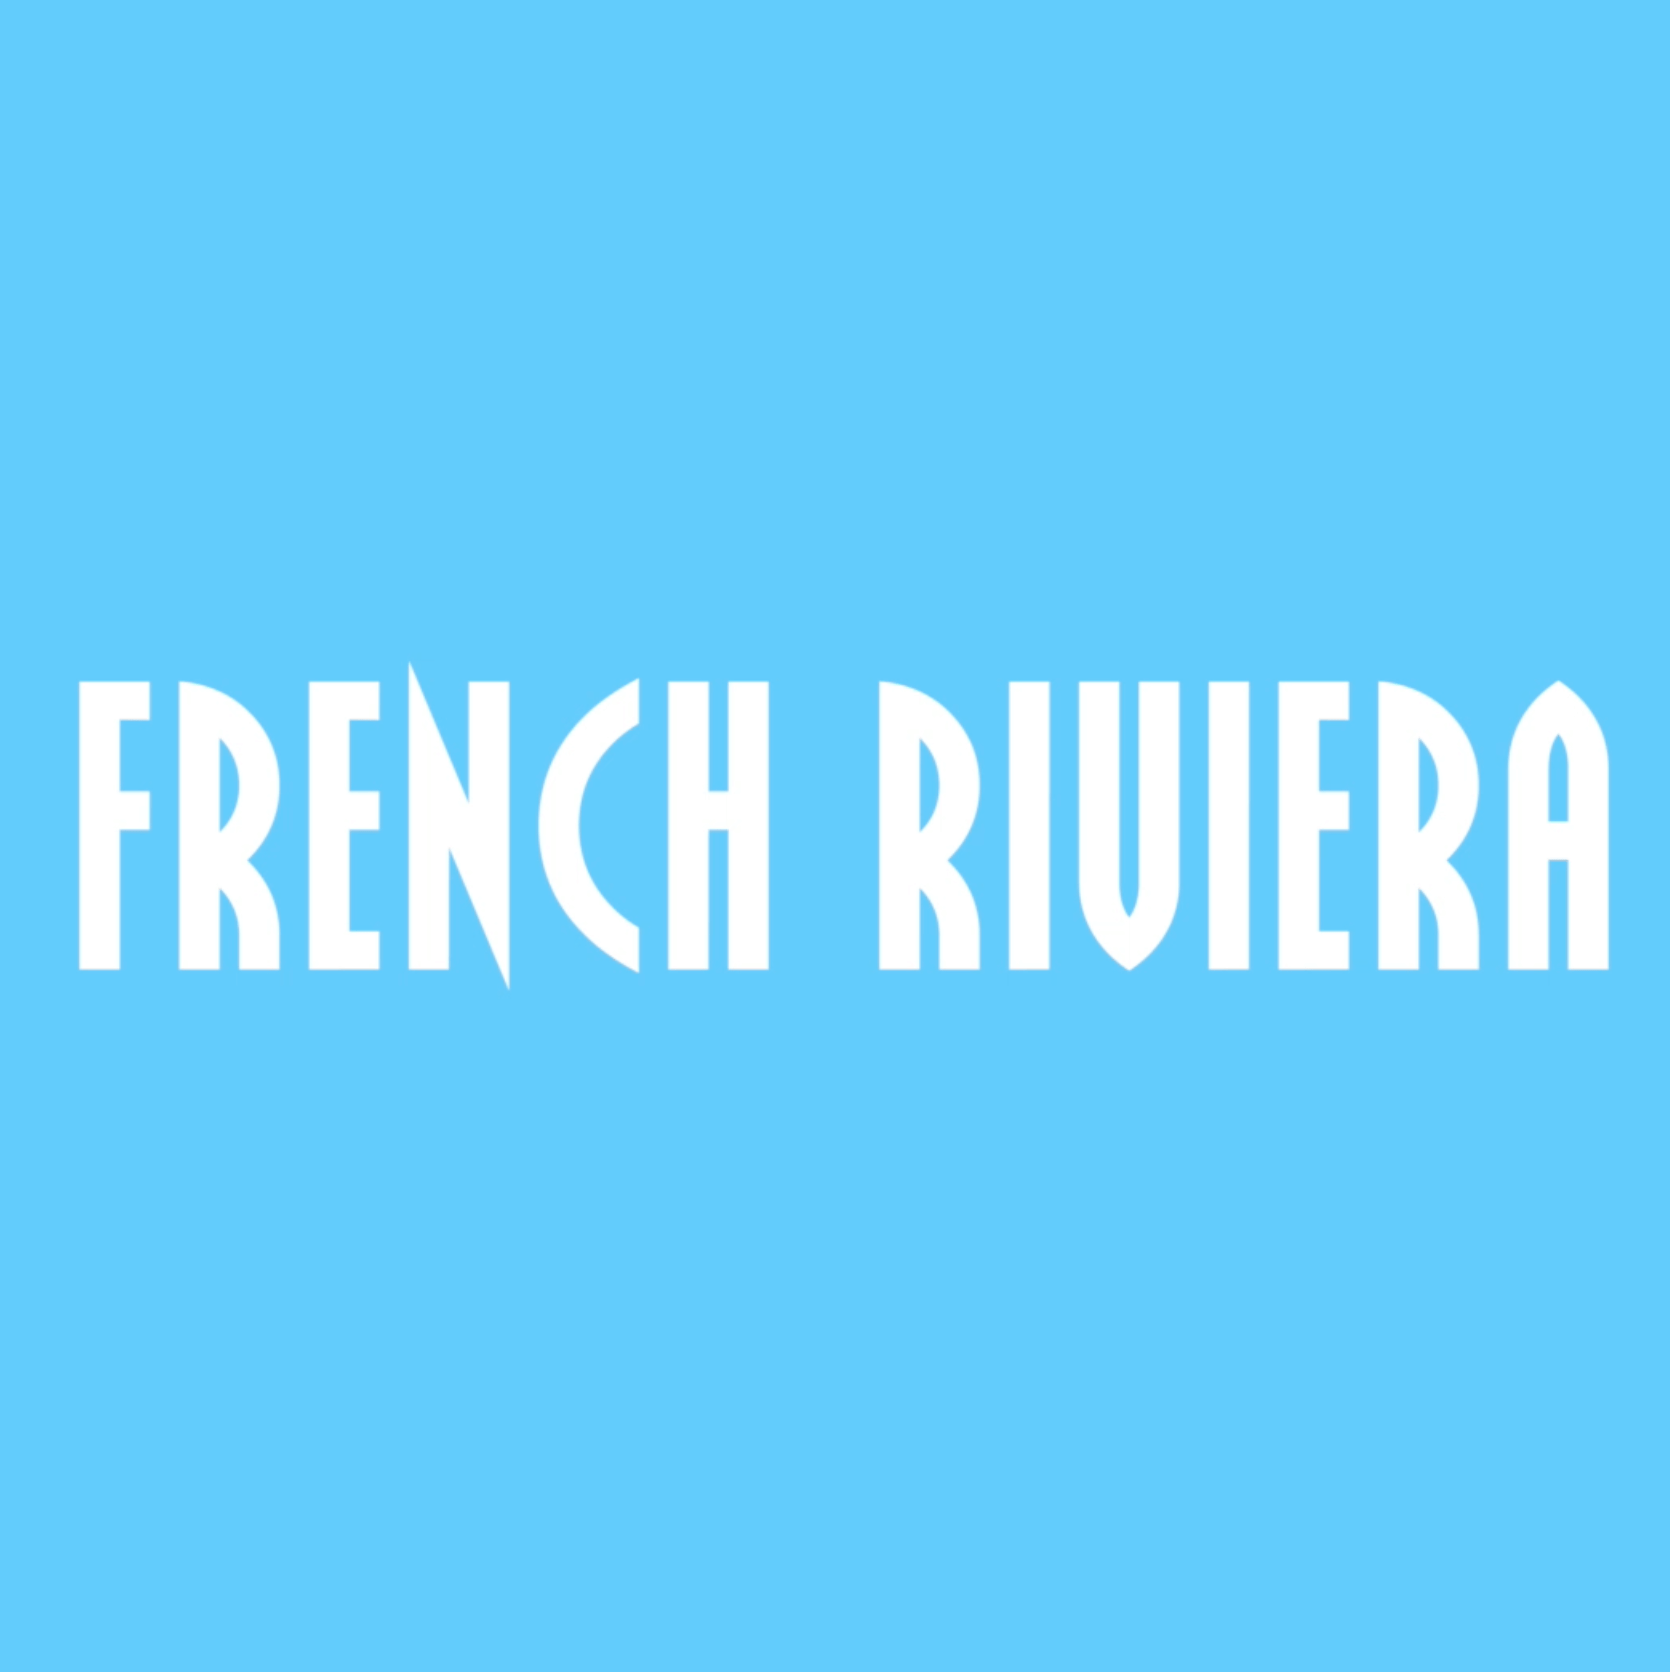 French Riviera - Coming Soon in UAE